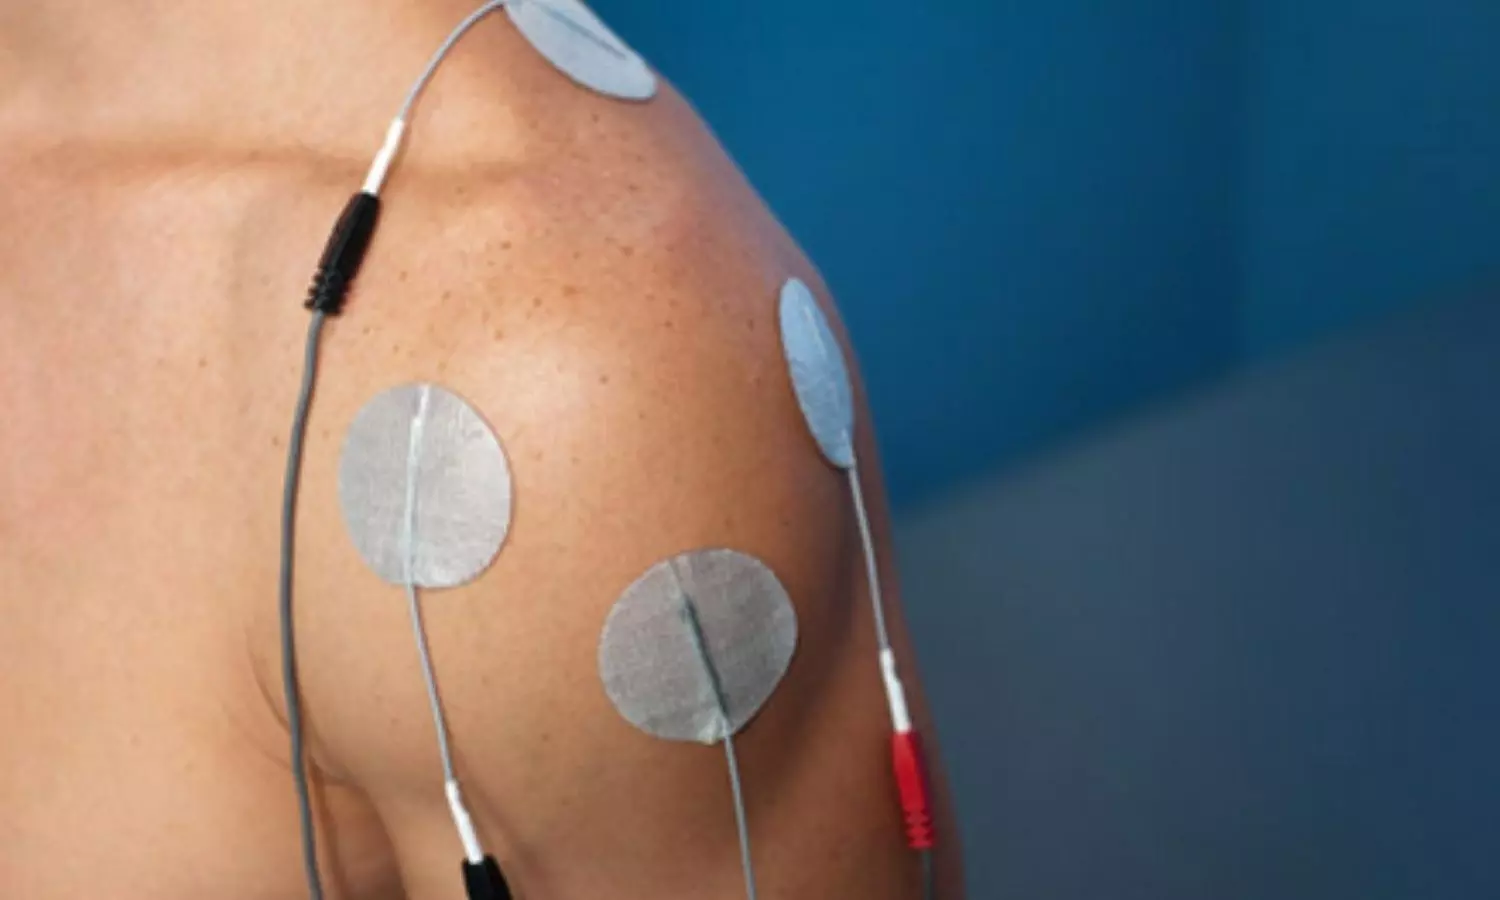 Electrical stimulation improves glucose tolerance in obese individuals: Study